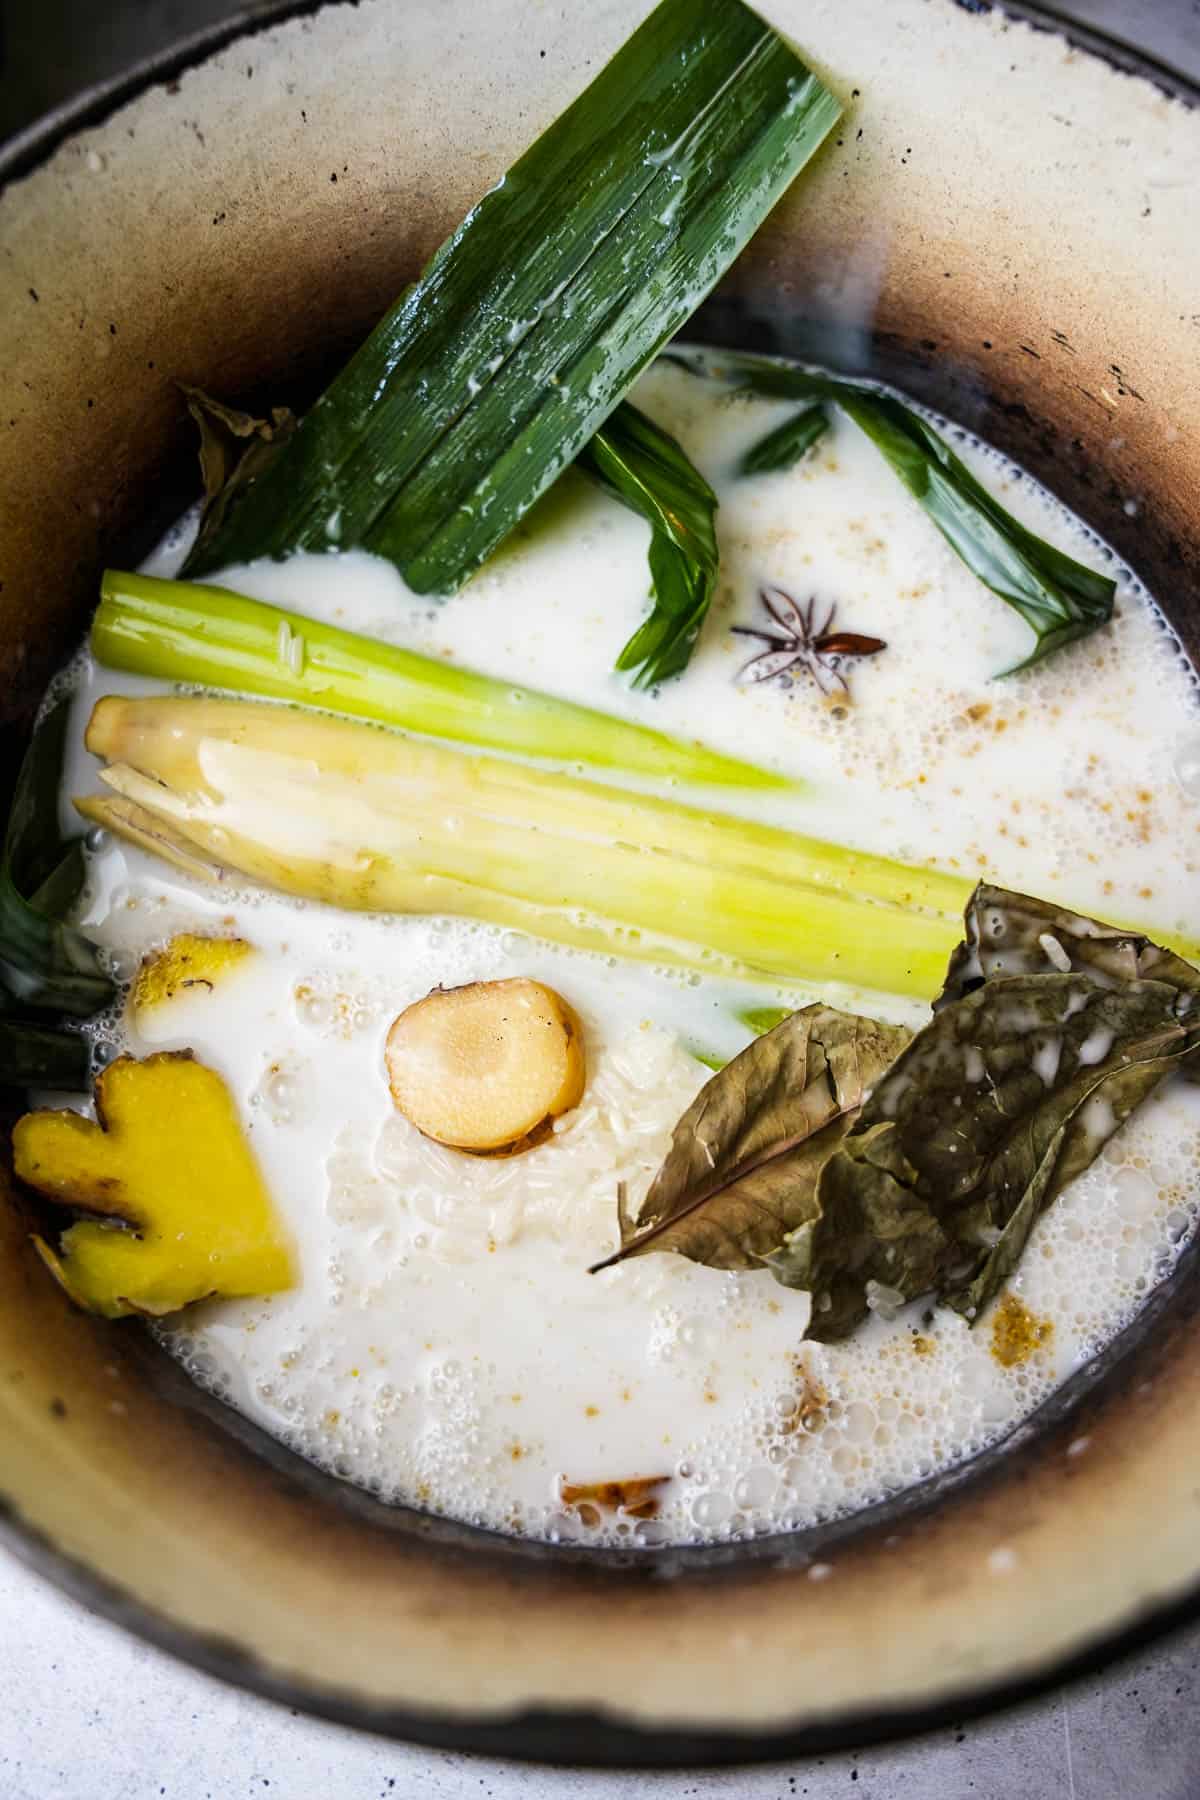 A ceramic pot containing all of the rice ingredients. You can see the Indonesian bay leaves, ginger, galangal, pandan, lemongrass, and star anise floating in the coconut milk.